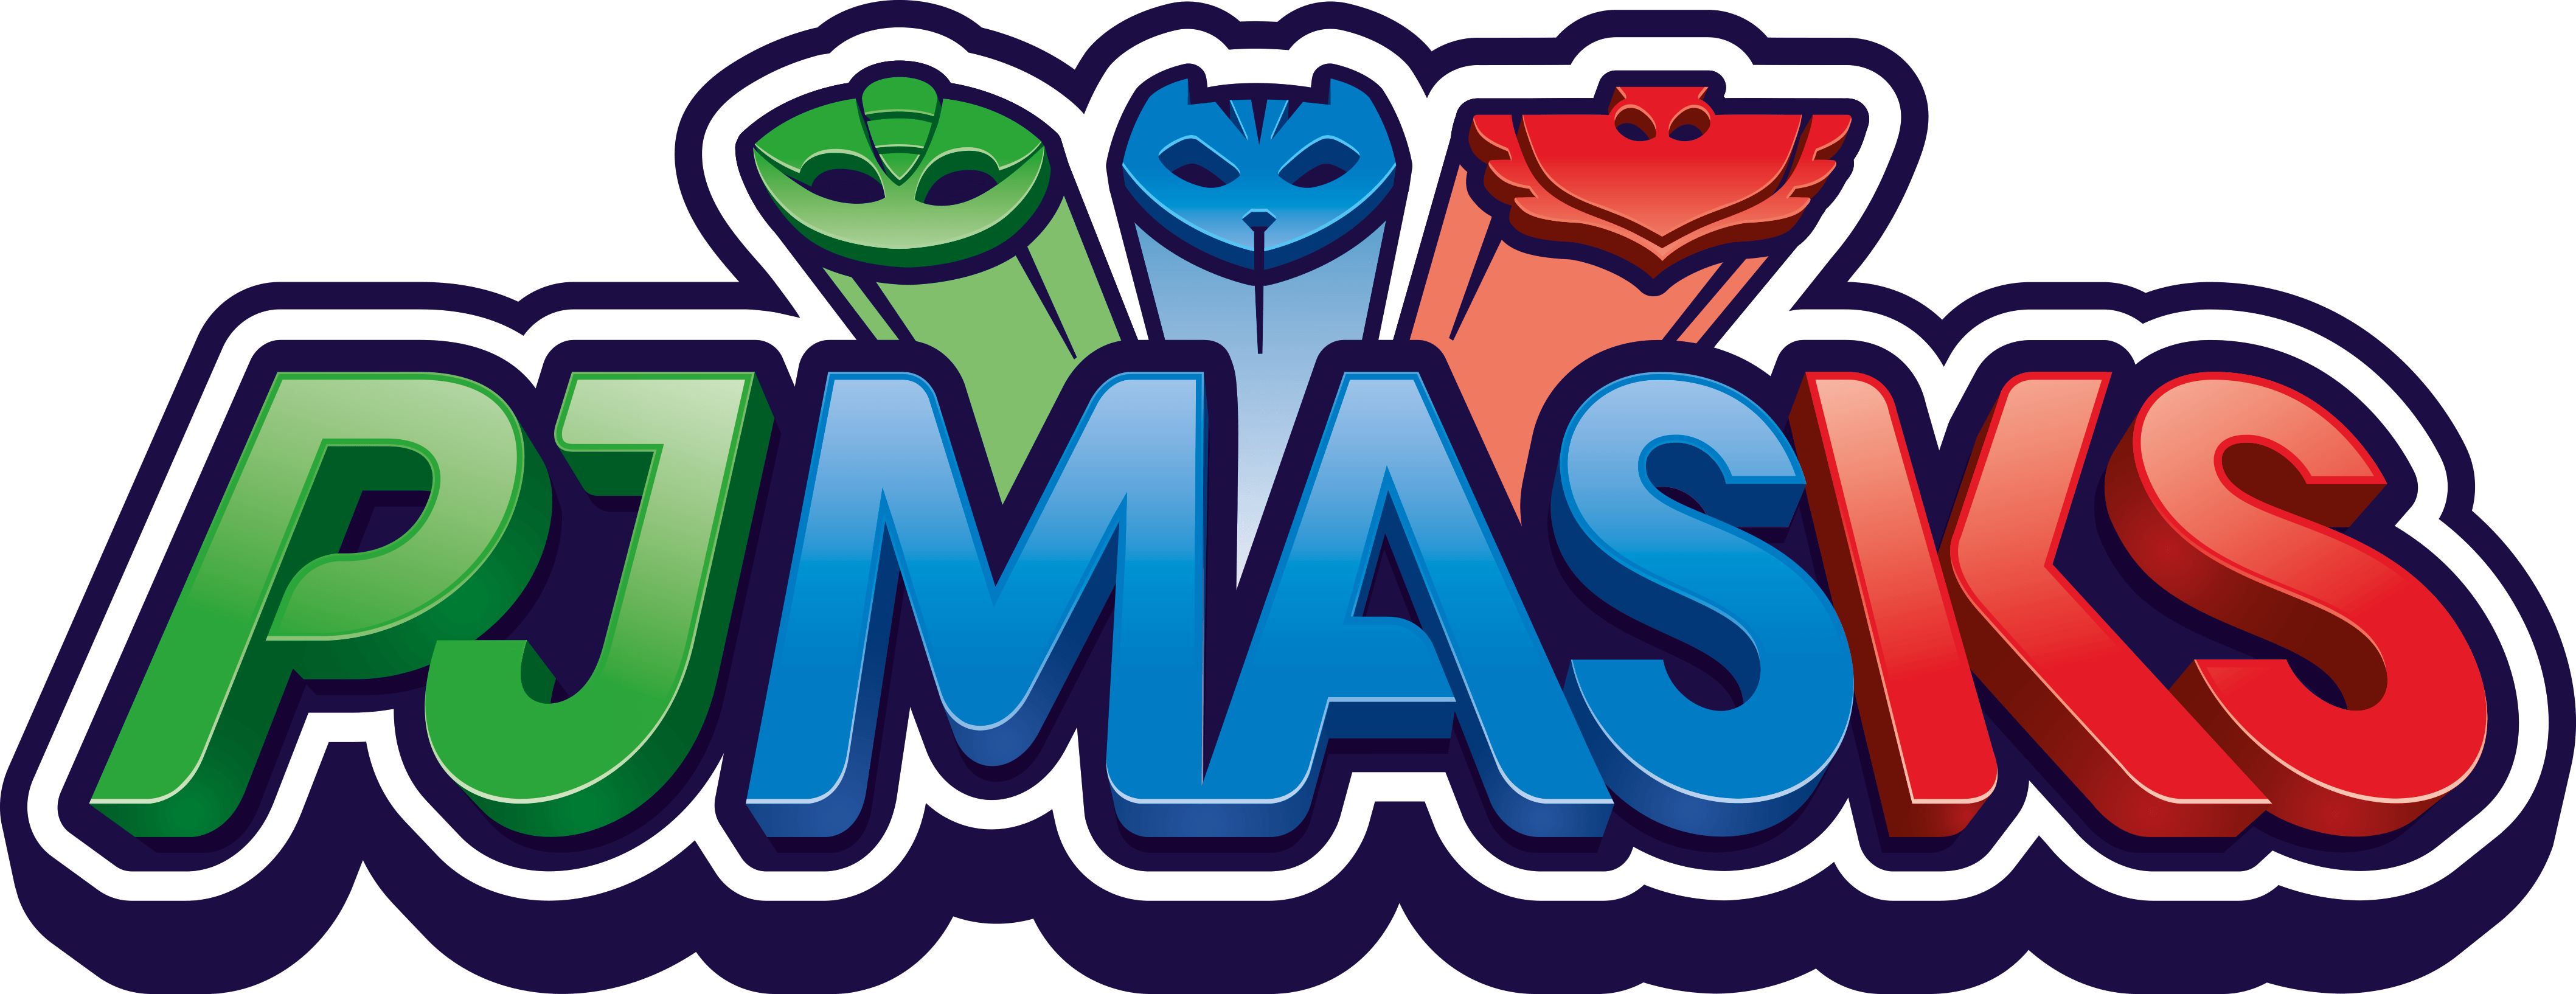 PJ Masks Logo - NDNA partners with Entertainment One's PJ Masks to inspire children